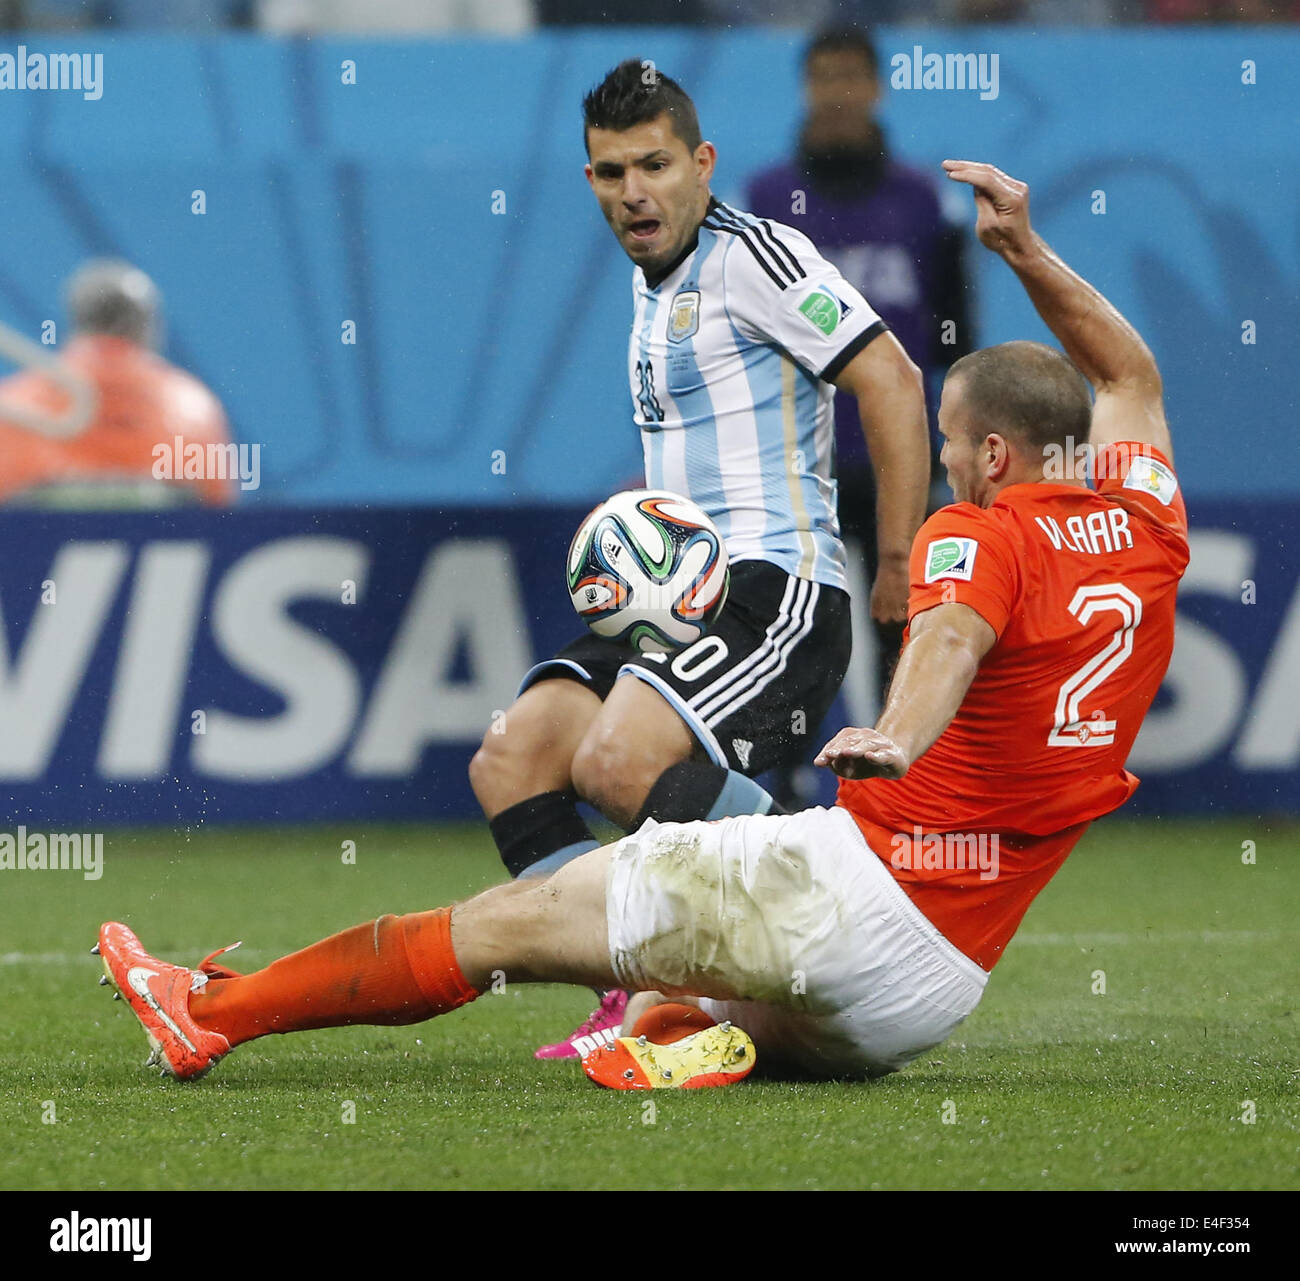 Sao Paulo, Brazil. 9th July, 2014. Netherlands' Ron Vlaar (front) vies with Argentina's Sergio Aguero during a semifinal match between Netherlands and Argentina of 2014 FIFA World Cup at the Arena de Sao Paulo Stadium in Sao Paulo, Brazil, on July 9, 2014. Credit:  Zhou Lei/Xinhua/Alamy Live News Stock Photo